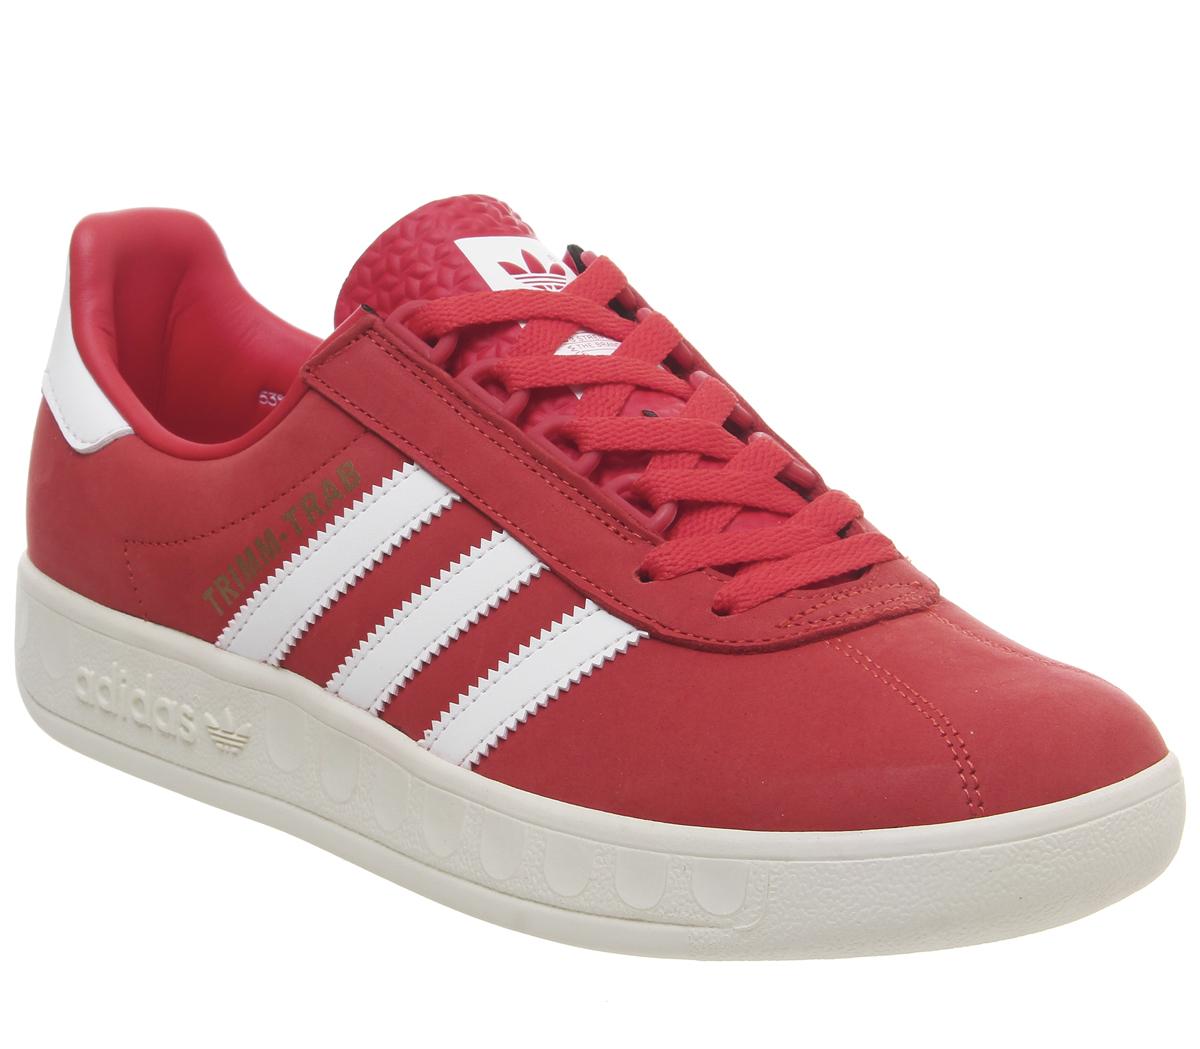 adidas Trimm Trab Trainers Active Red White Gold - His trainers